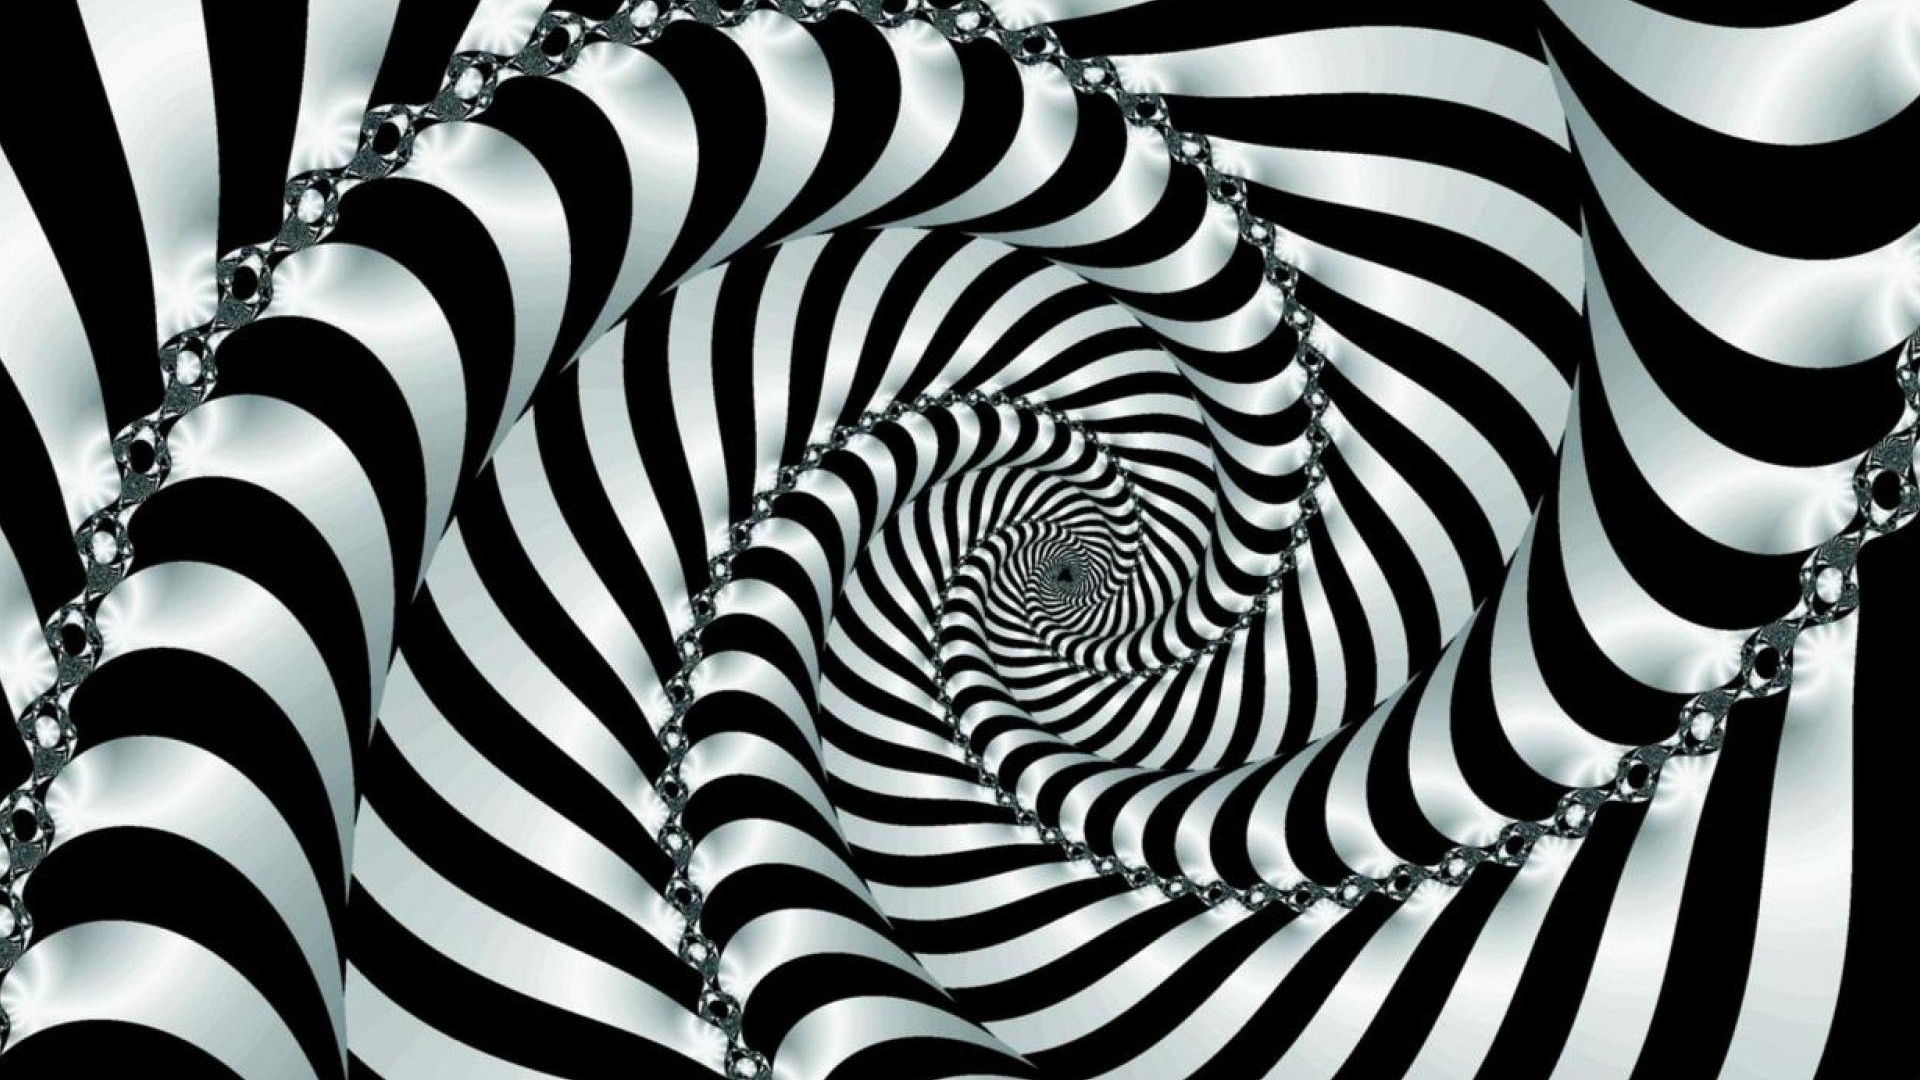 1920x1080 Full HD HD Tablet 10" Tablet 7". Wallpaper Name : Moving Optical Illusions  ...